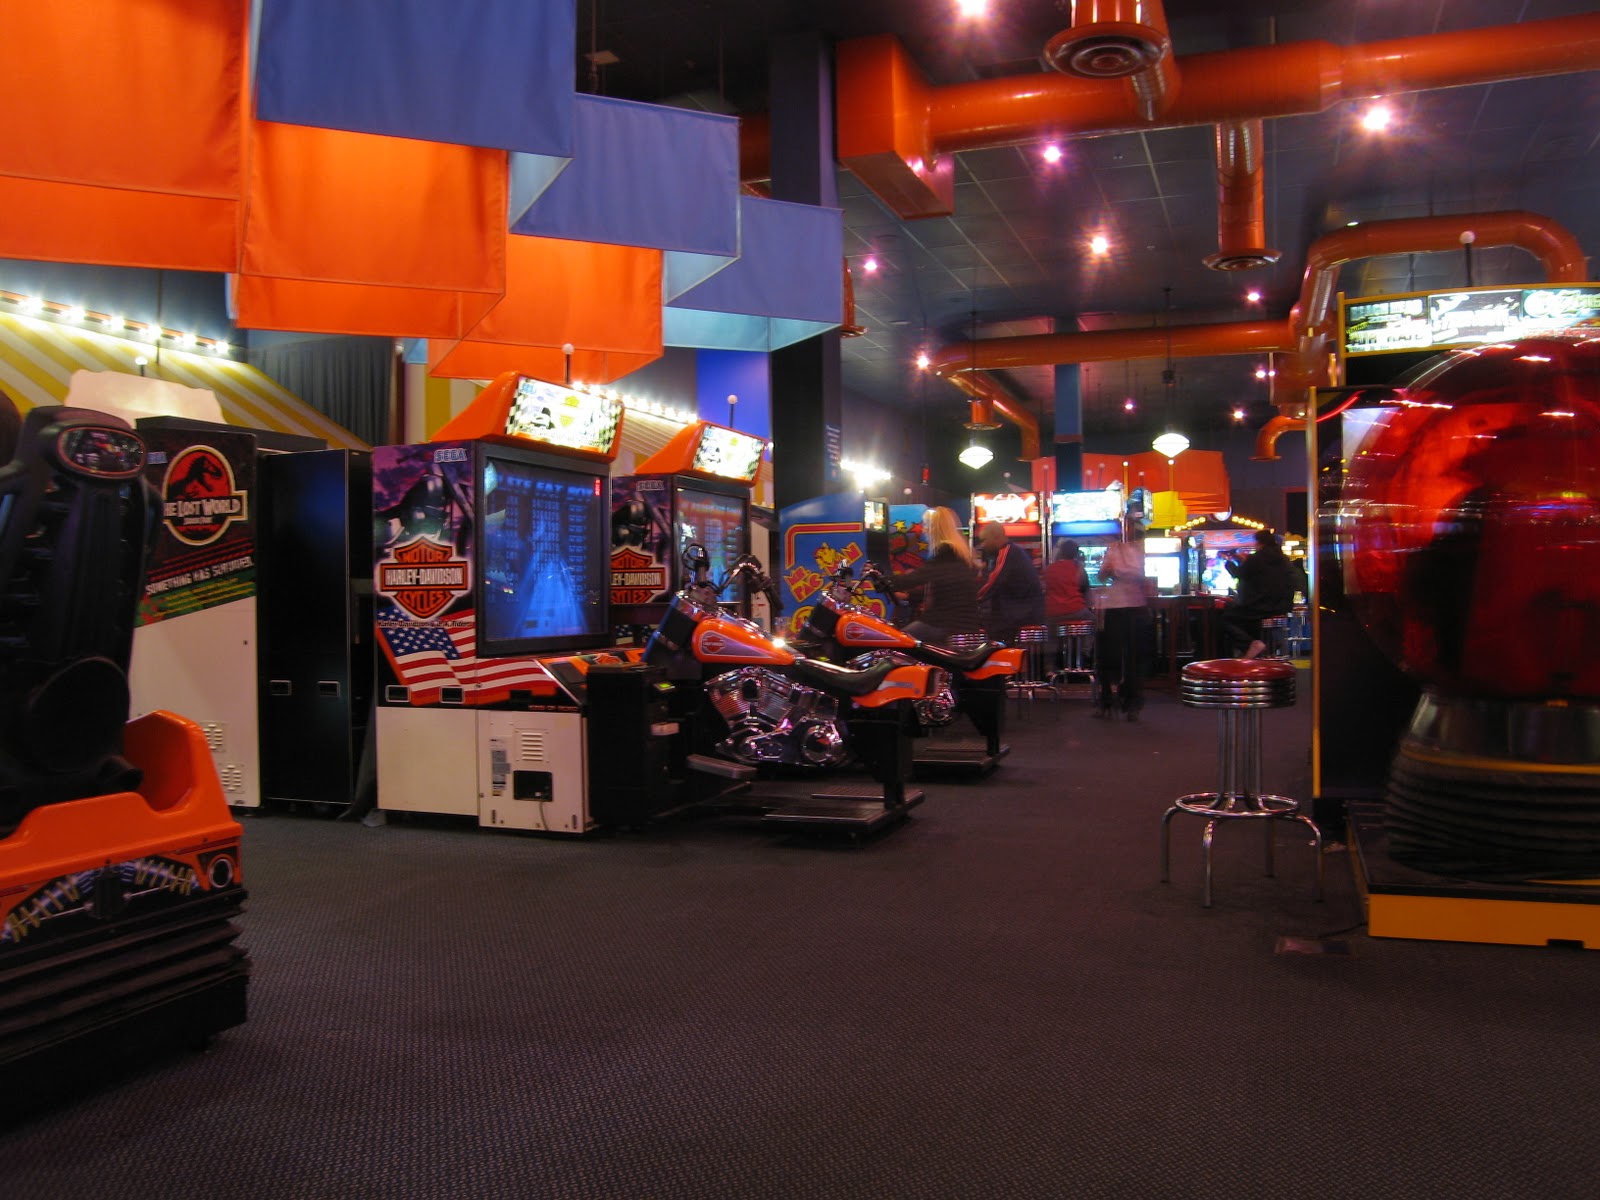 Philly Date Night: Escape into Play at Dave & Buster's